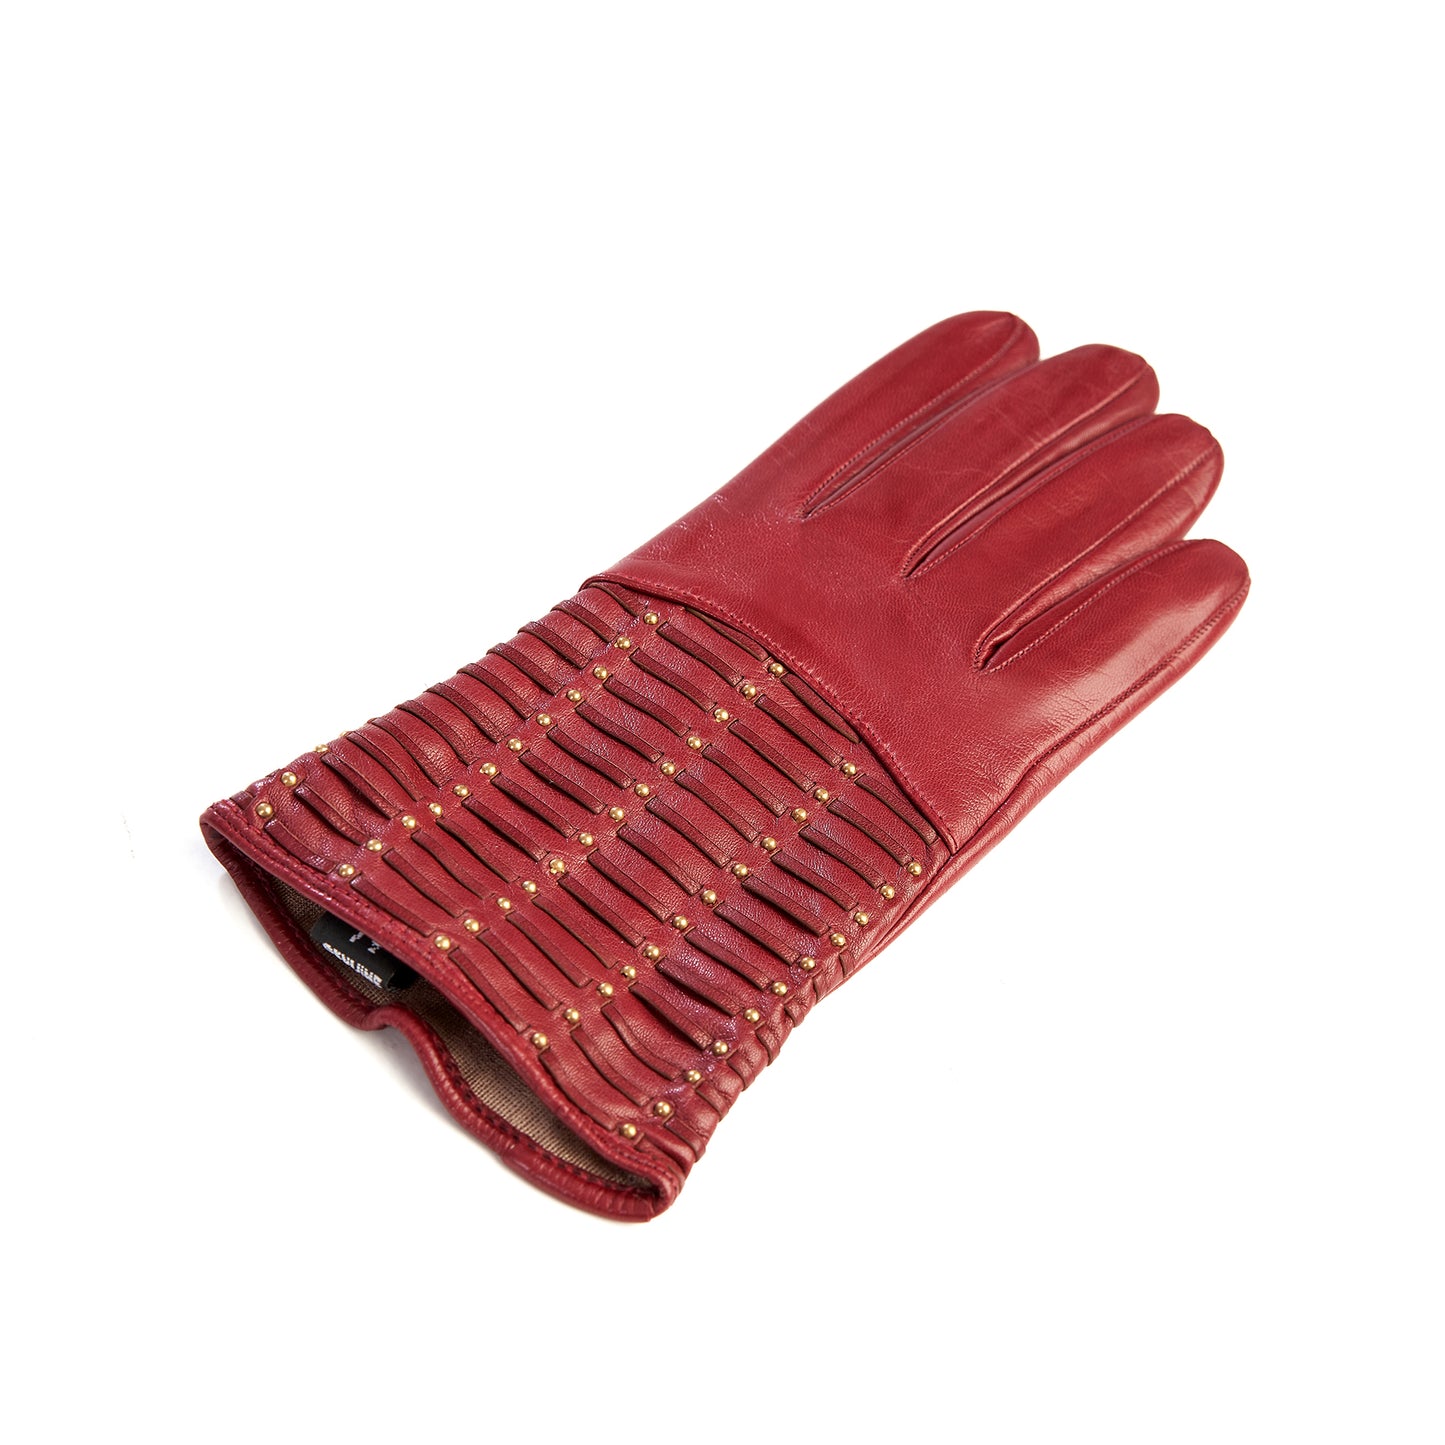 Womens' red leather gloves with studs and woven leather handmade